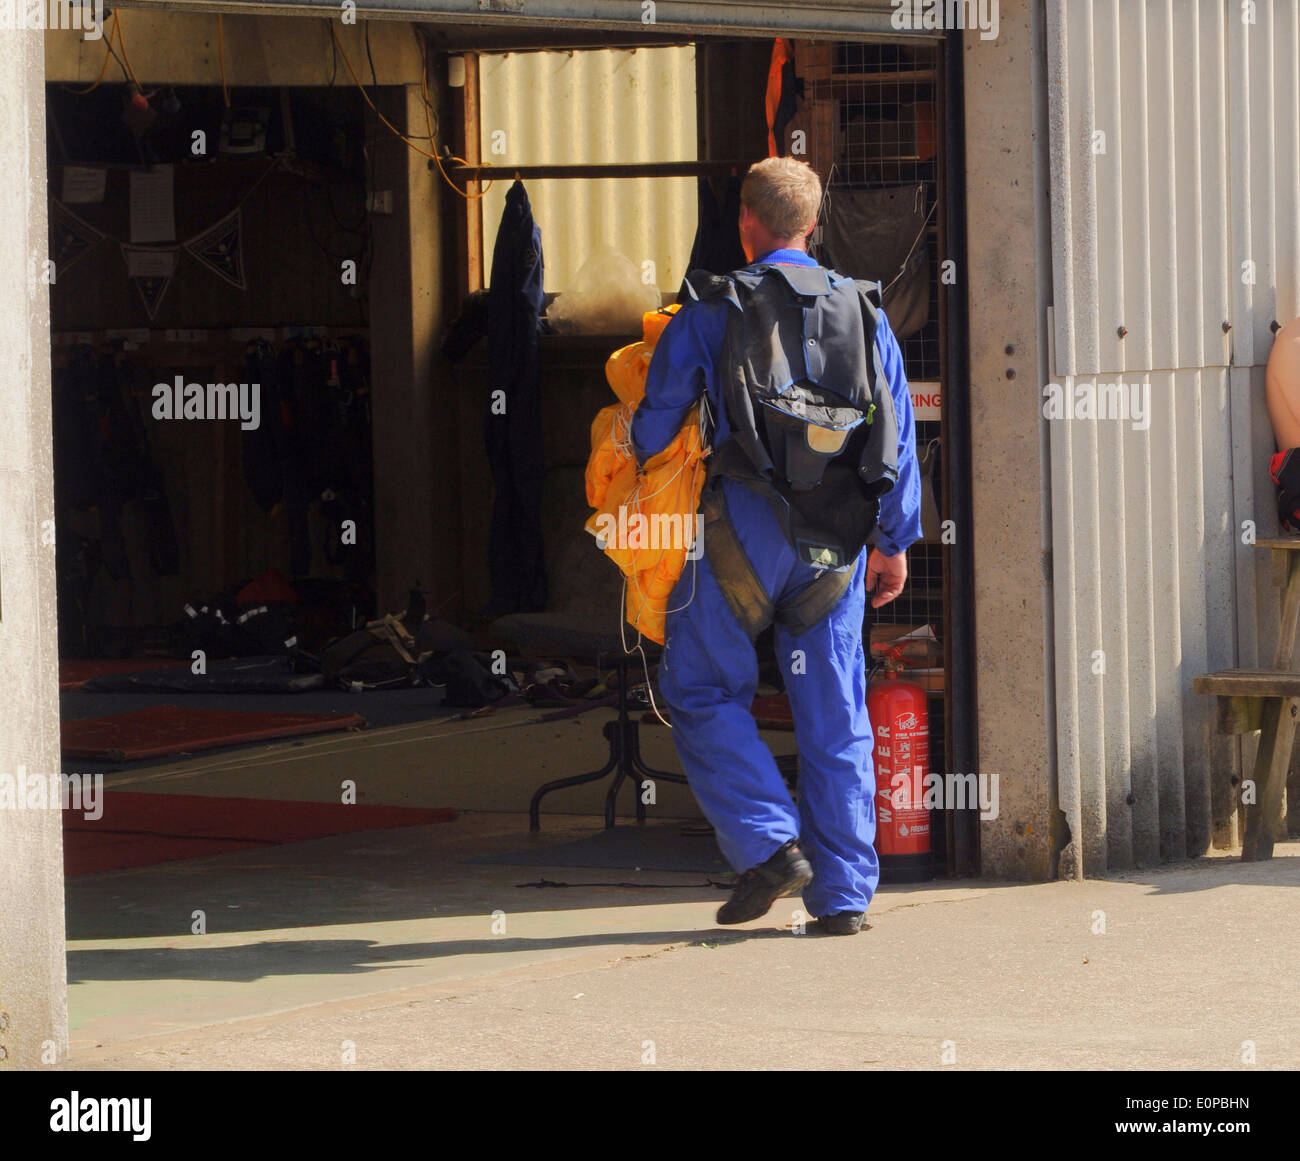 Headcorn, Kent, UK,18th May 2014.Proof that intense training works as parachutist, Luke Jordan, walks back to the hangar carrying his emergency chute.During Lukes fifth static line jump a  malfunction caused him to abandon the main chute and open his emergency chute for safe descent. David Burr/Alamy Live News Stock Photo